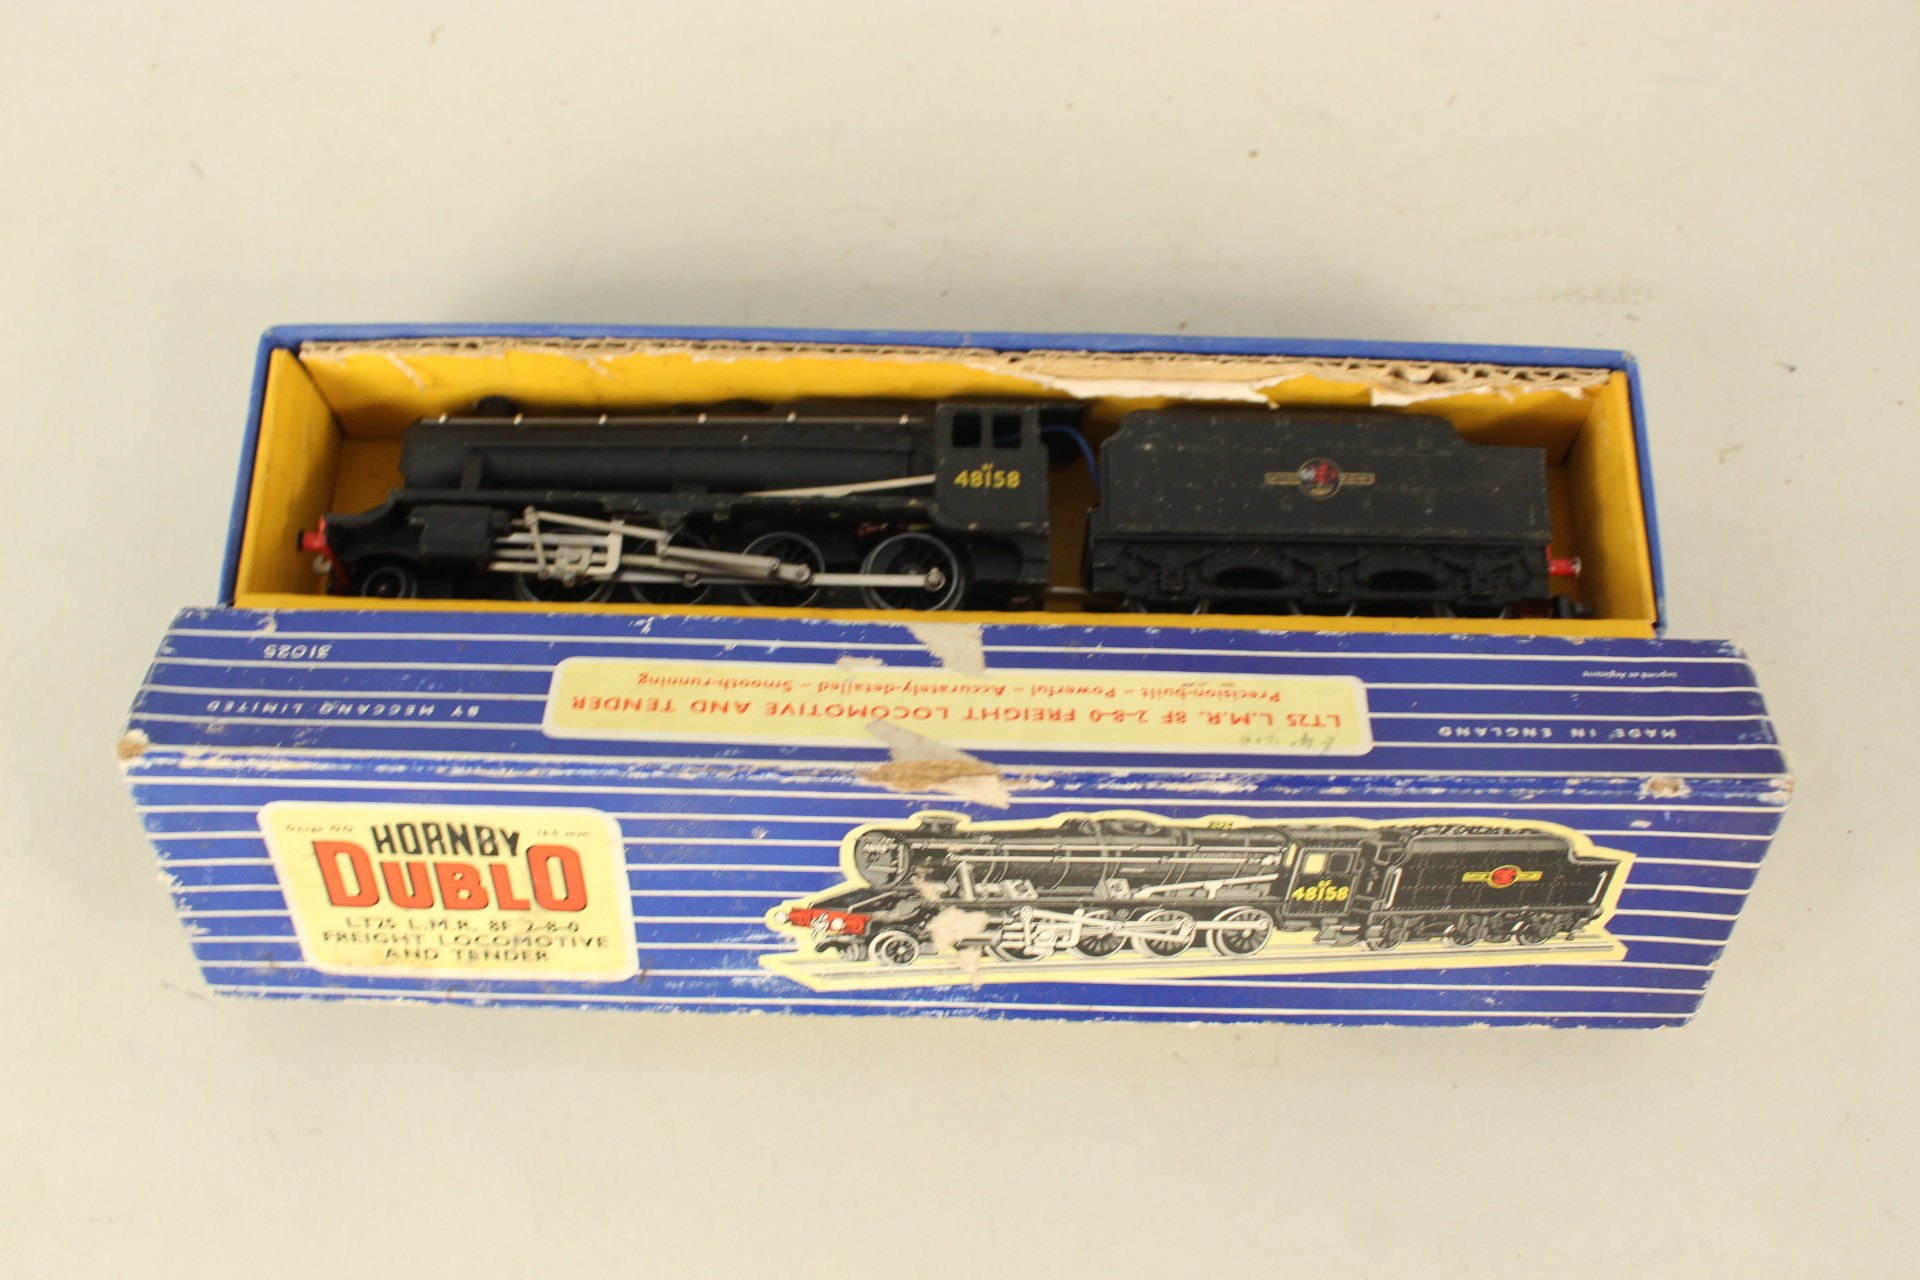 A boxed Hornby Dublo 48158 LMR 8 F 2-8-0 loco and tender